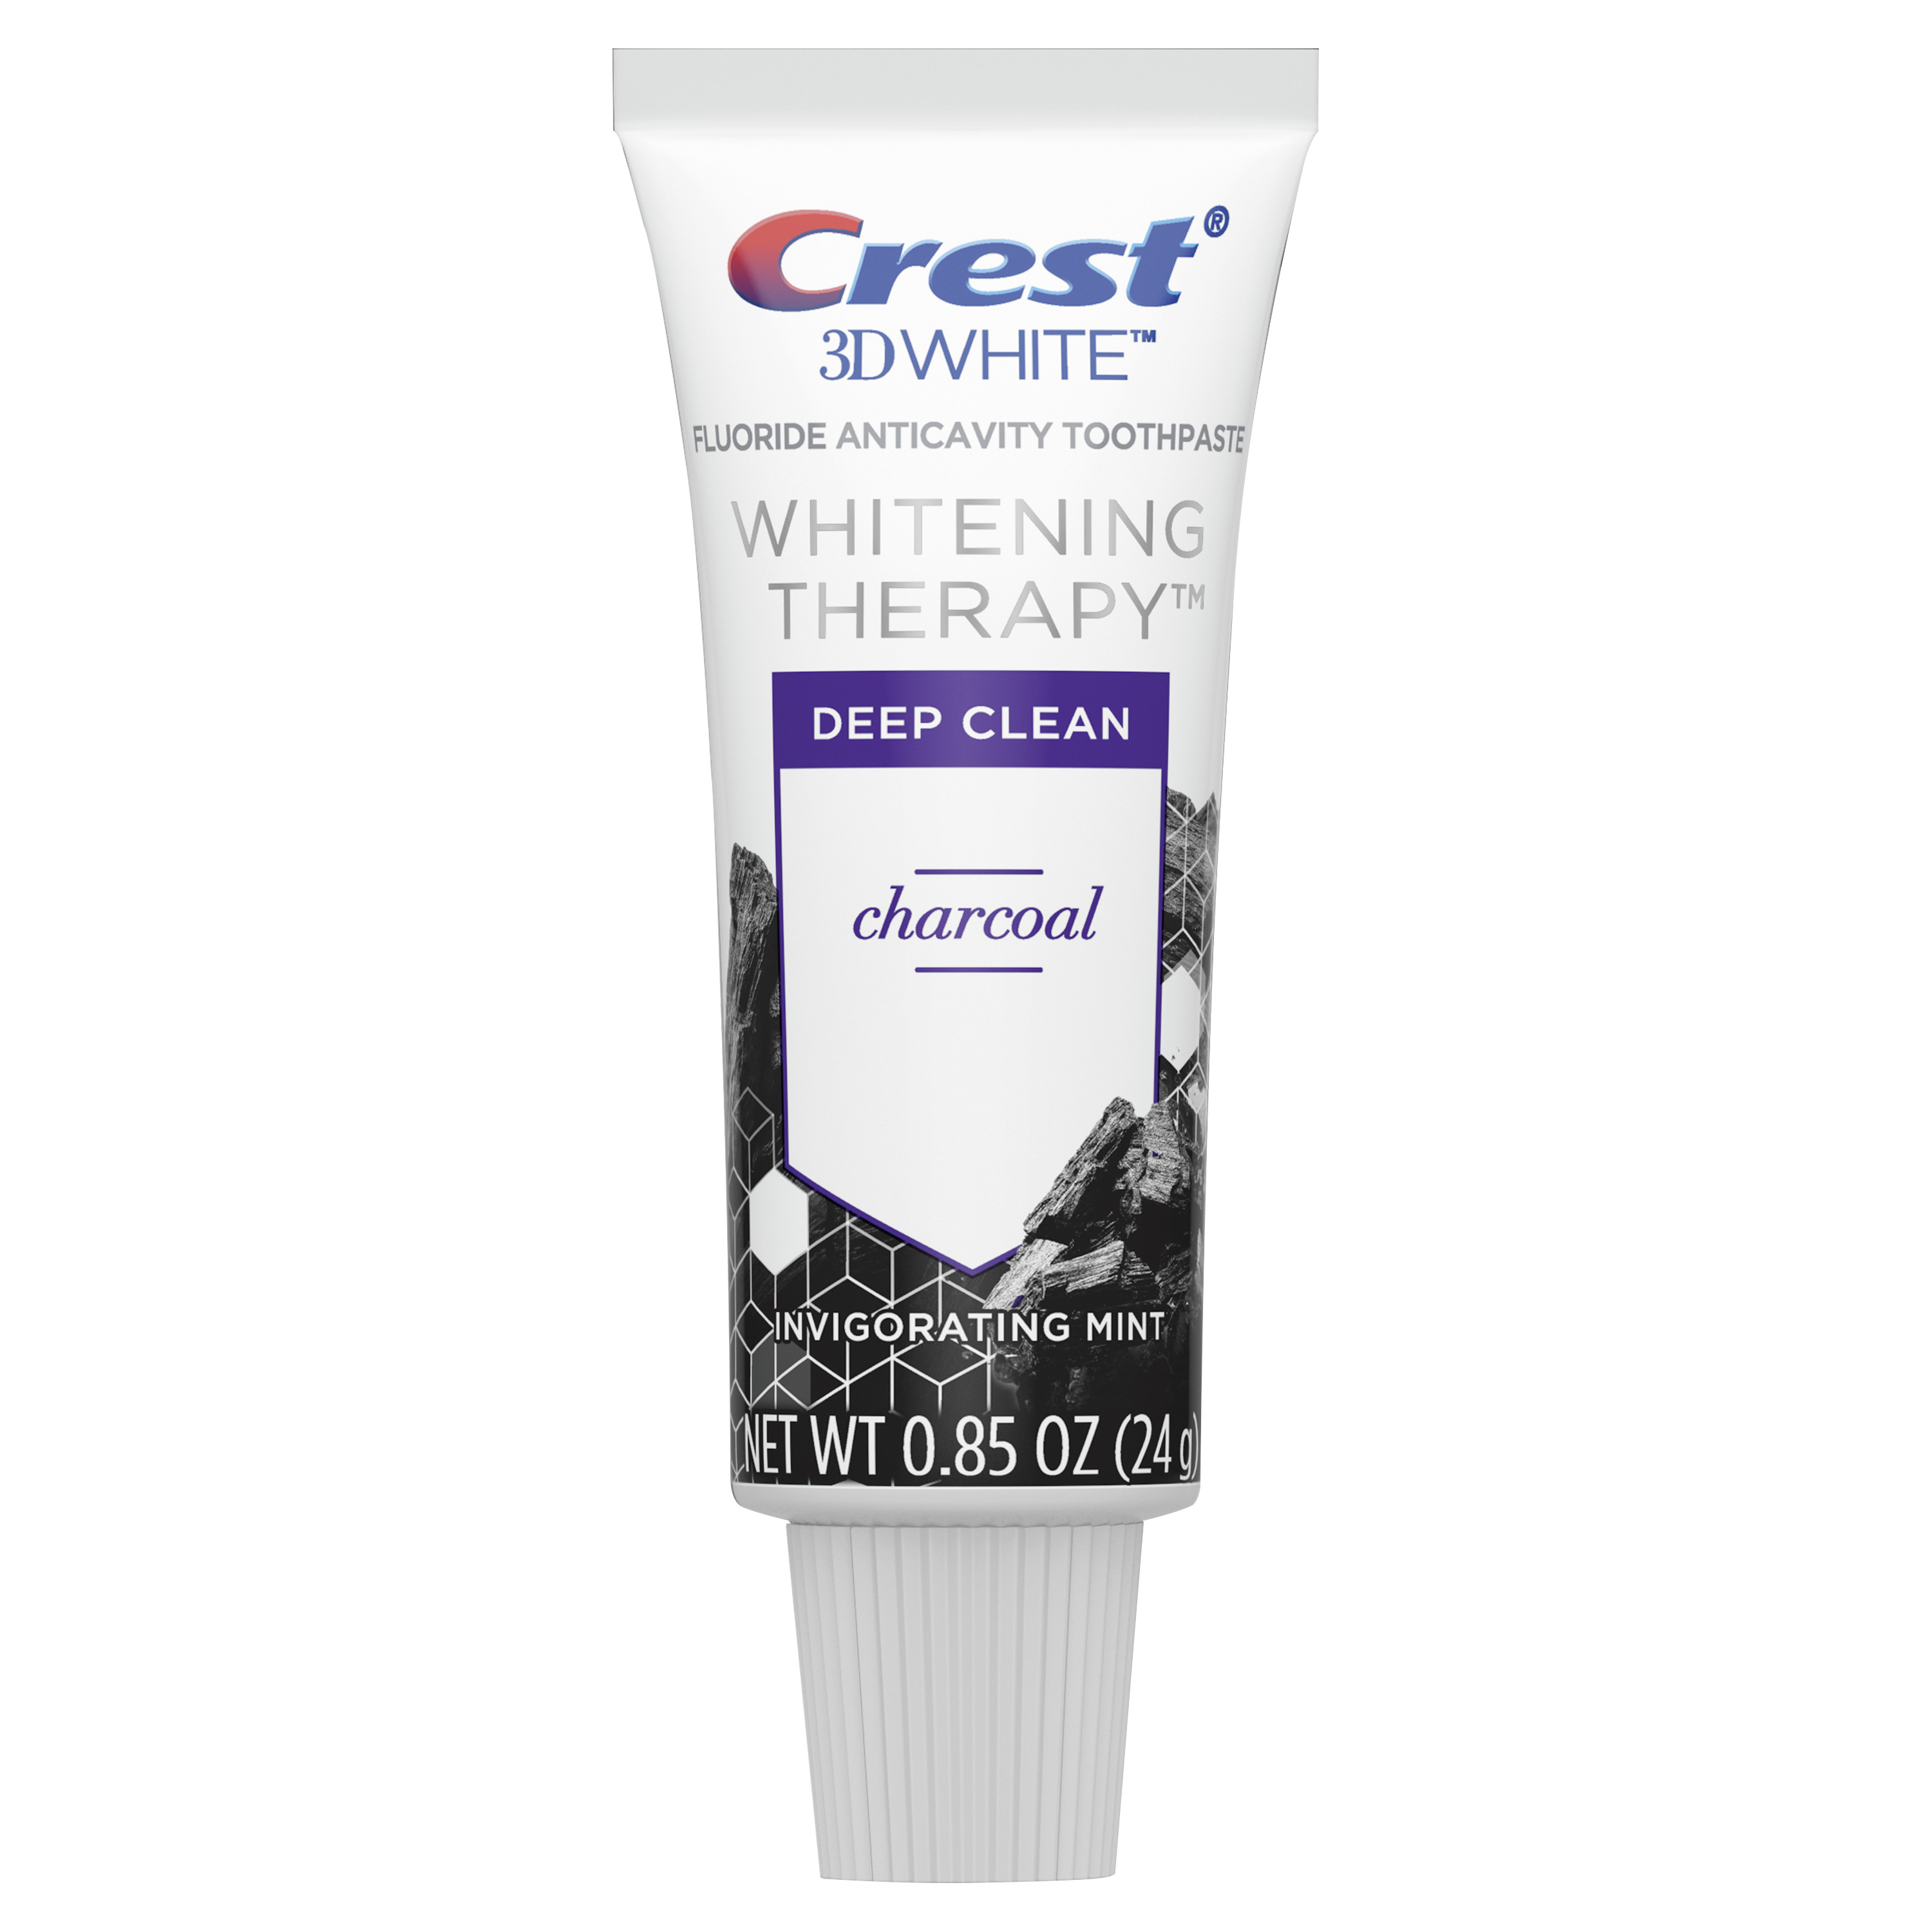 Crest 3D White Whitening Therapy Charcoal Deep Clean Fluoride Toothpaste, Invigorating Mint, .85 oz - image 3 of 7